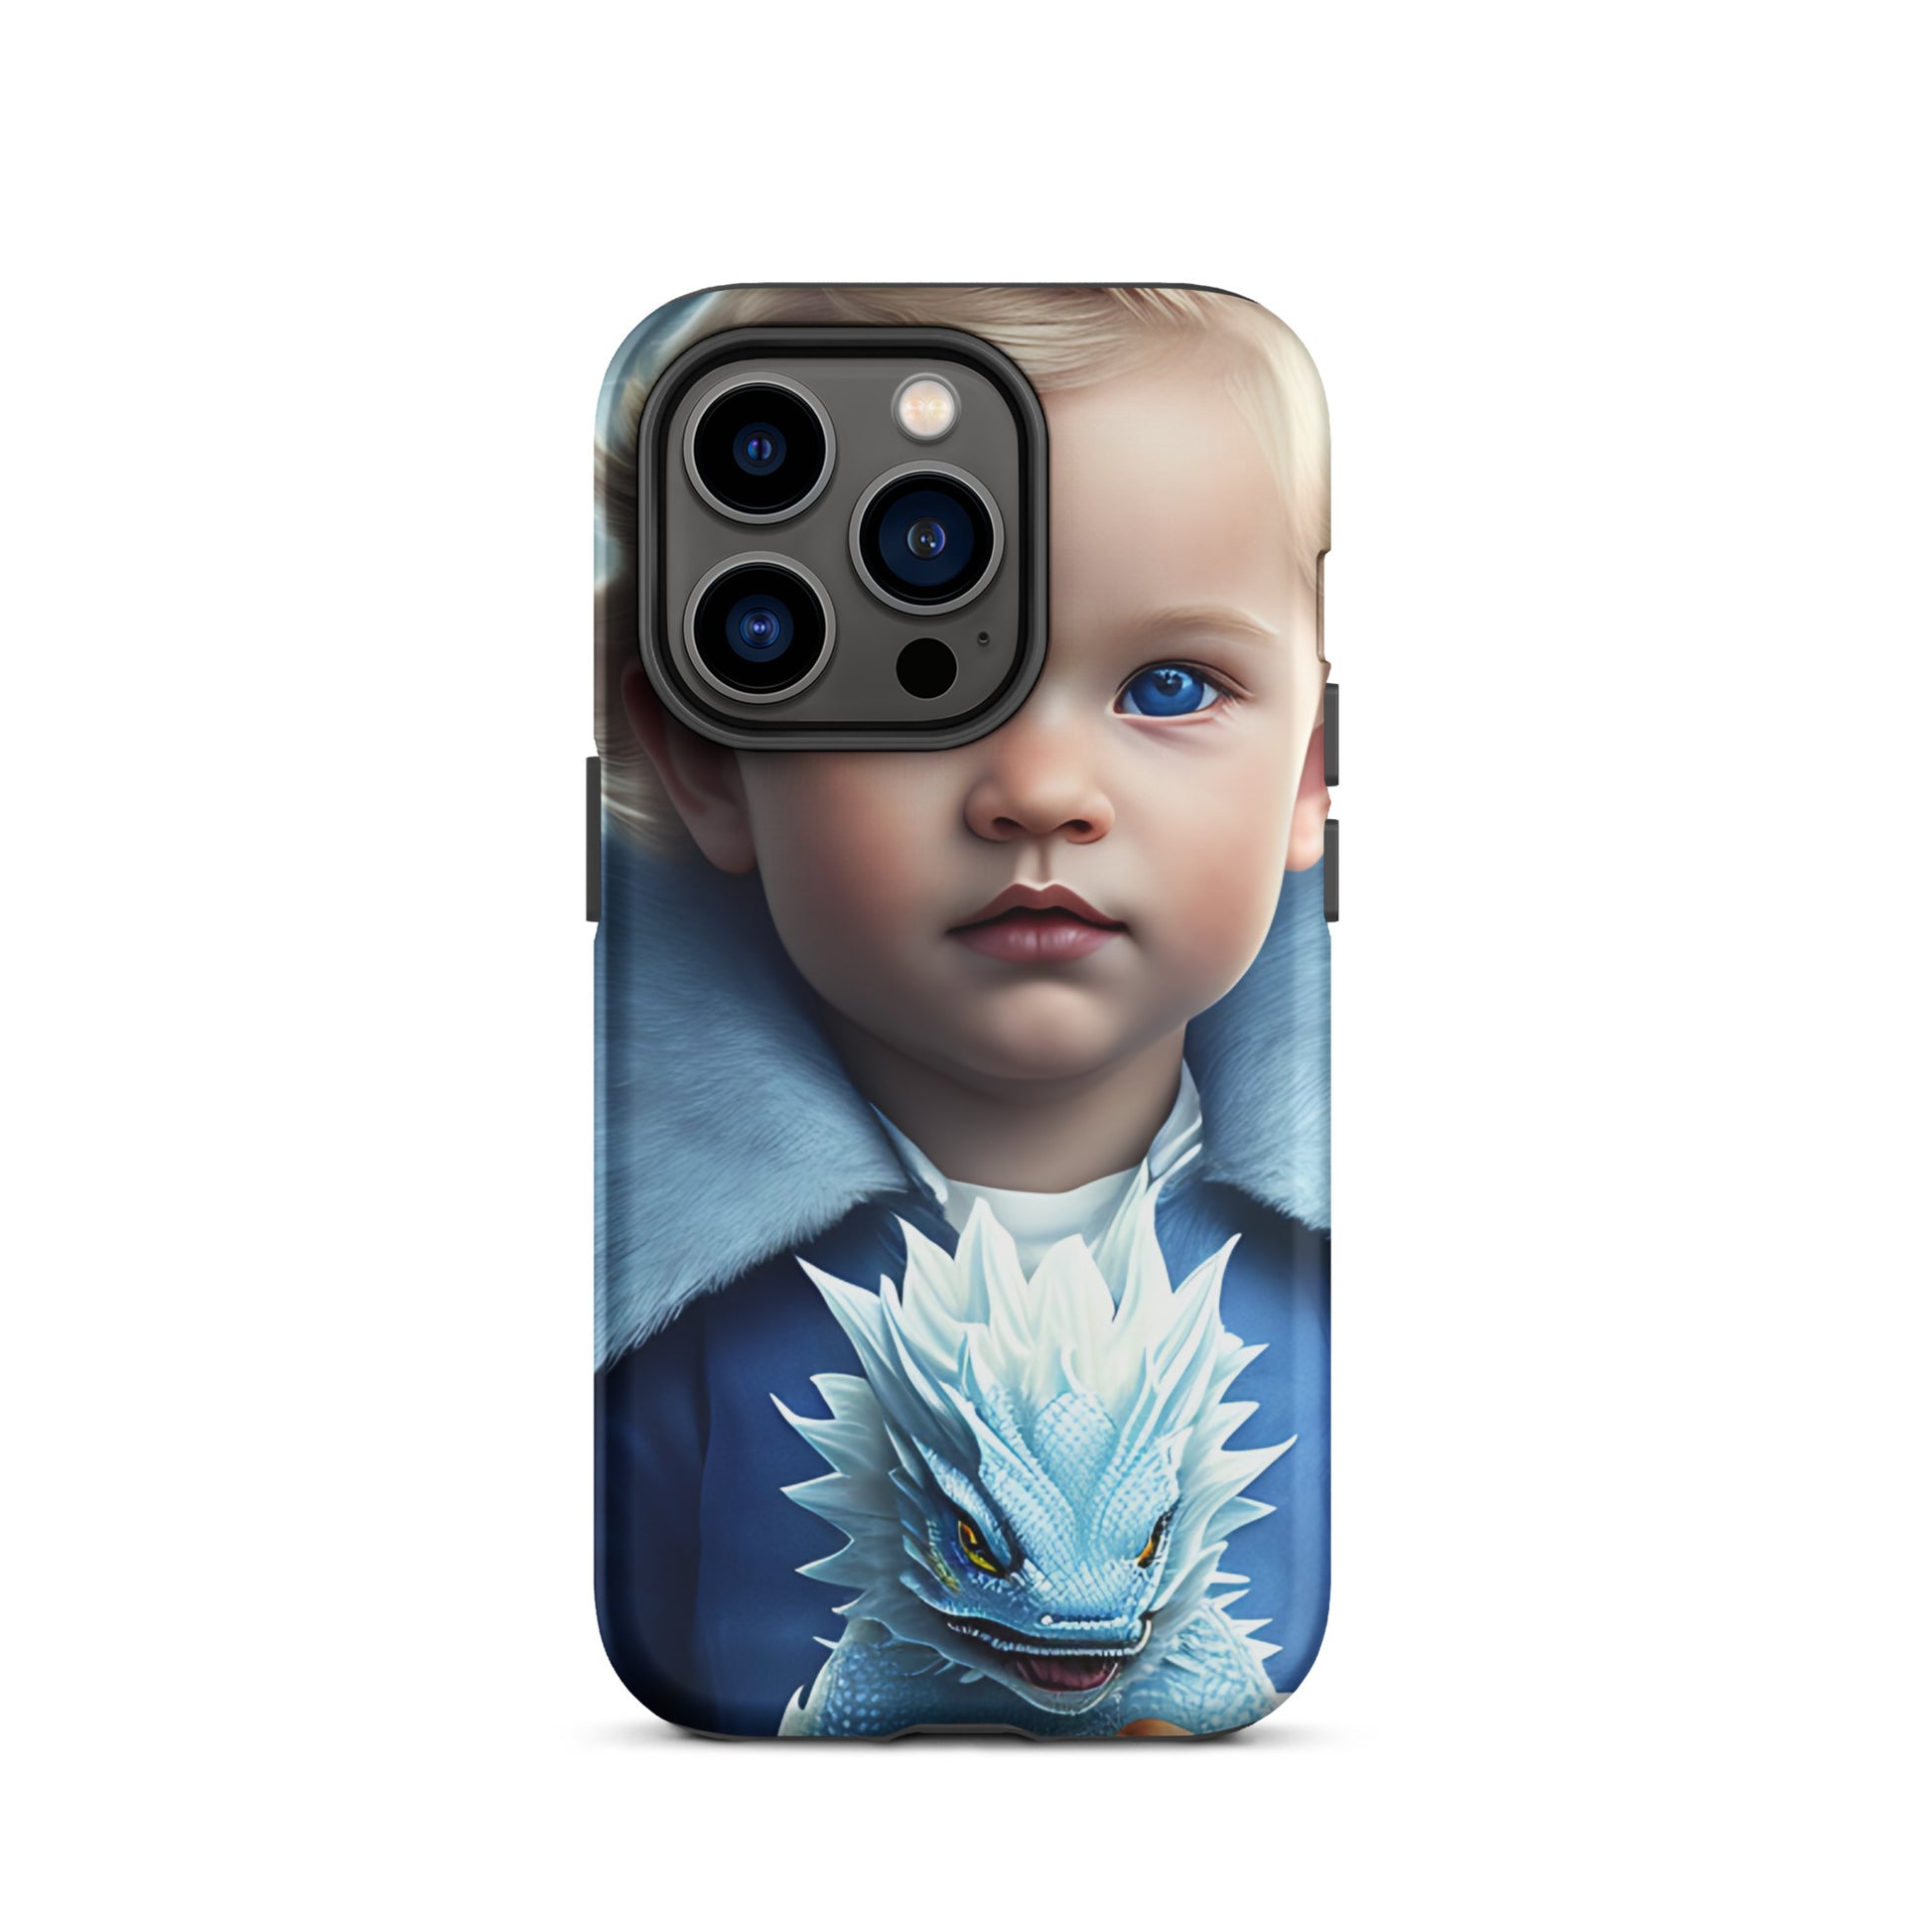 A picture of a an iphone case with a blond haired blue eyed boy, blue top holding a baby ice dragon in front - Dragon Prince #2 tough iphone case - matte-iphone-14-pro-front